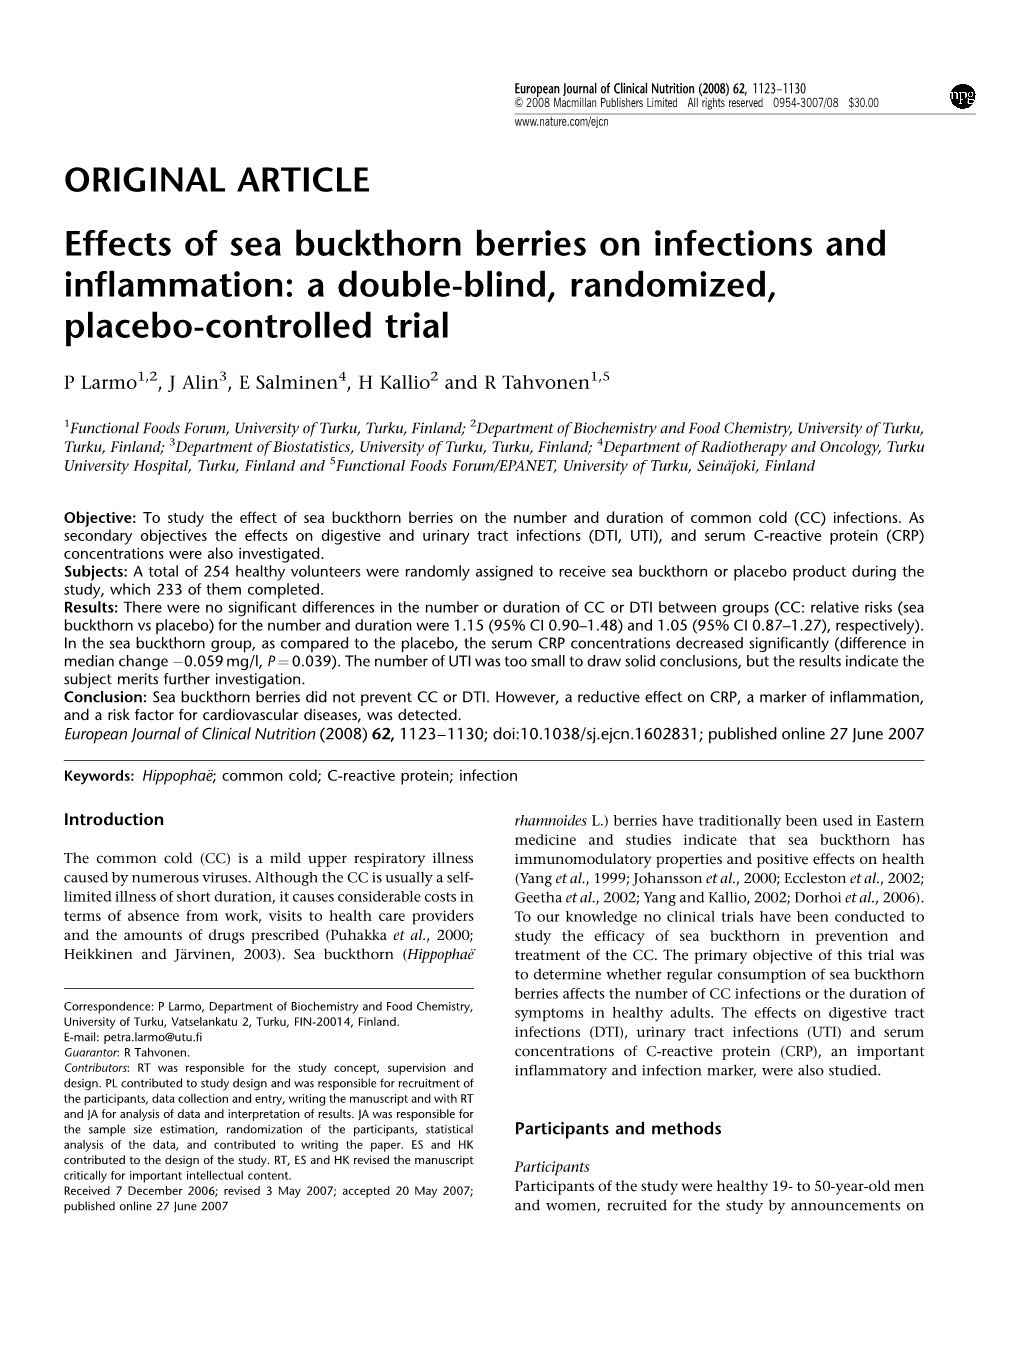 Effects of Sea Buckthorn Berries on Infections and Inflammation: a Double-Blind, Randomized, Placebo-Controlled Trial